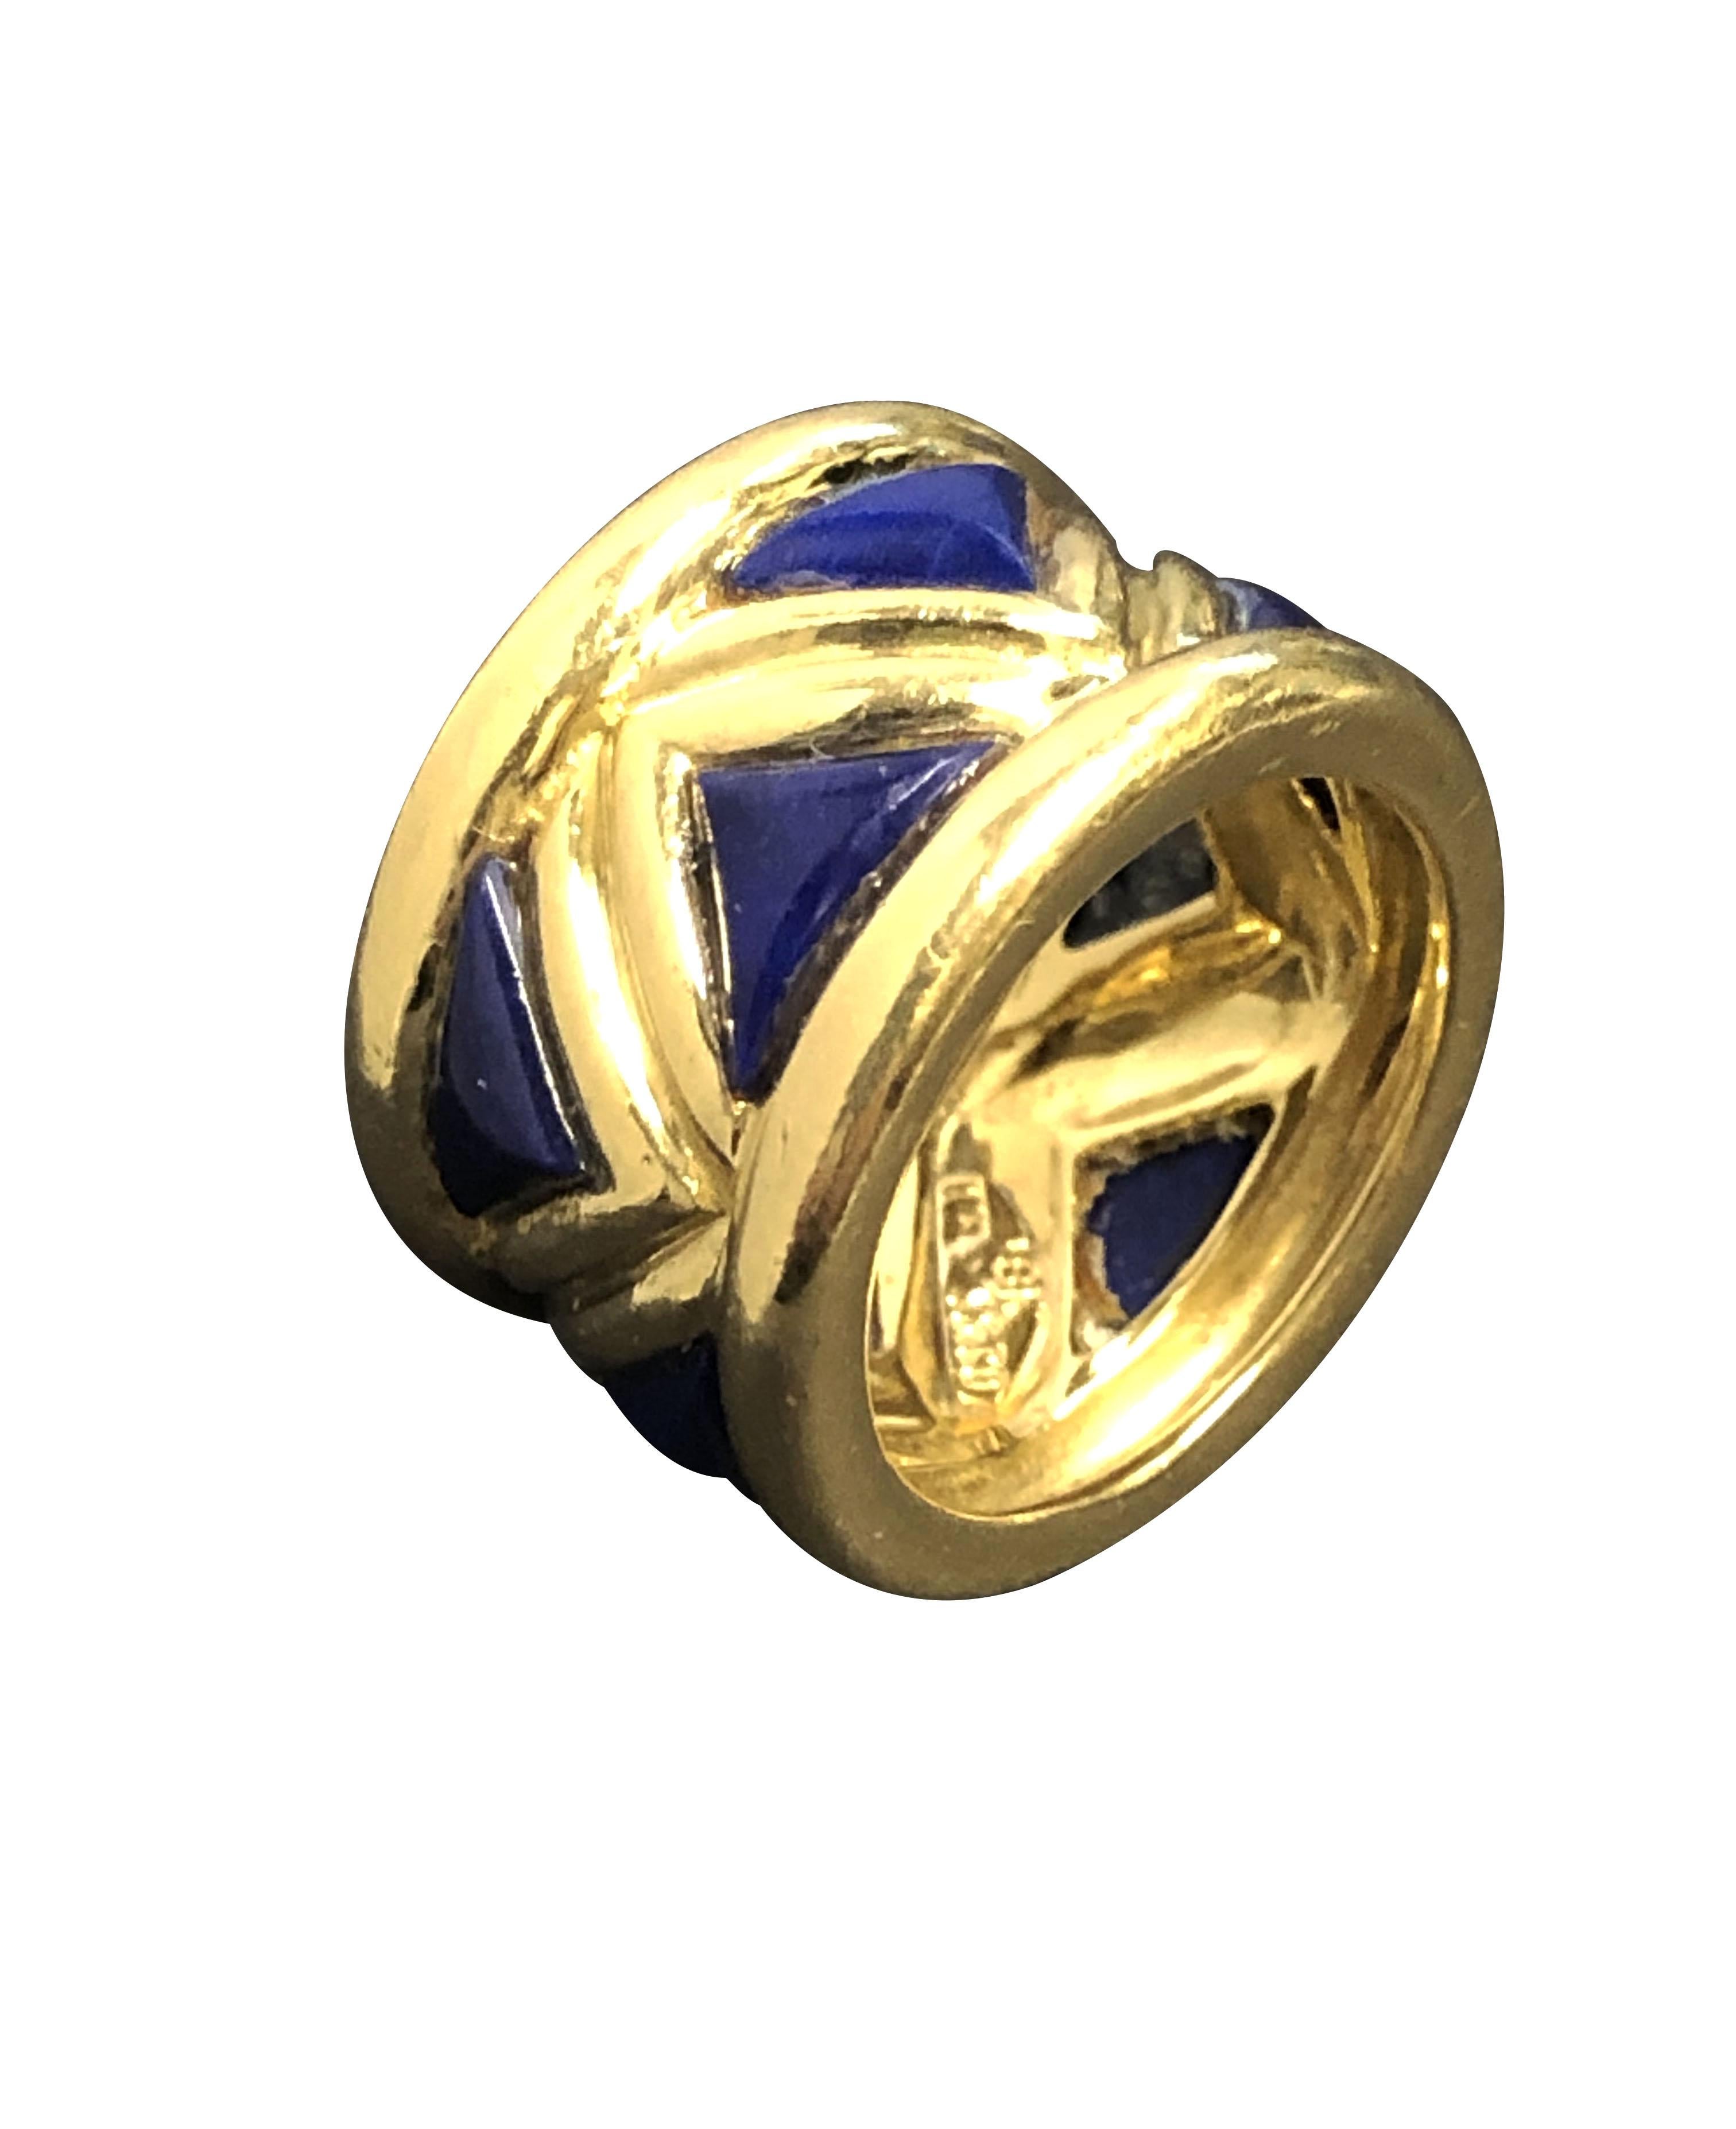 Circa 1980s Tiffany & Company 18K Yellow Gold Band Ring, measuring 1/2 inch wide and having a design of alternating Triangle cut Lapis Lazuli. Finger size 5. 